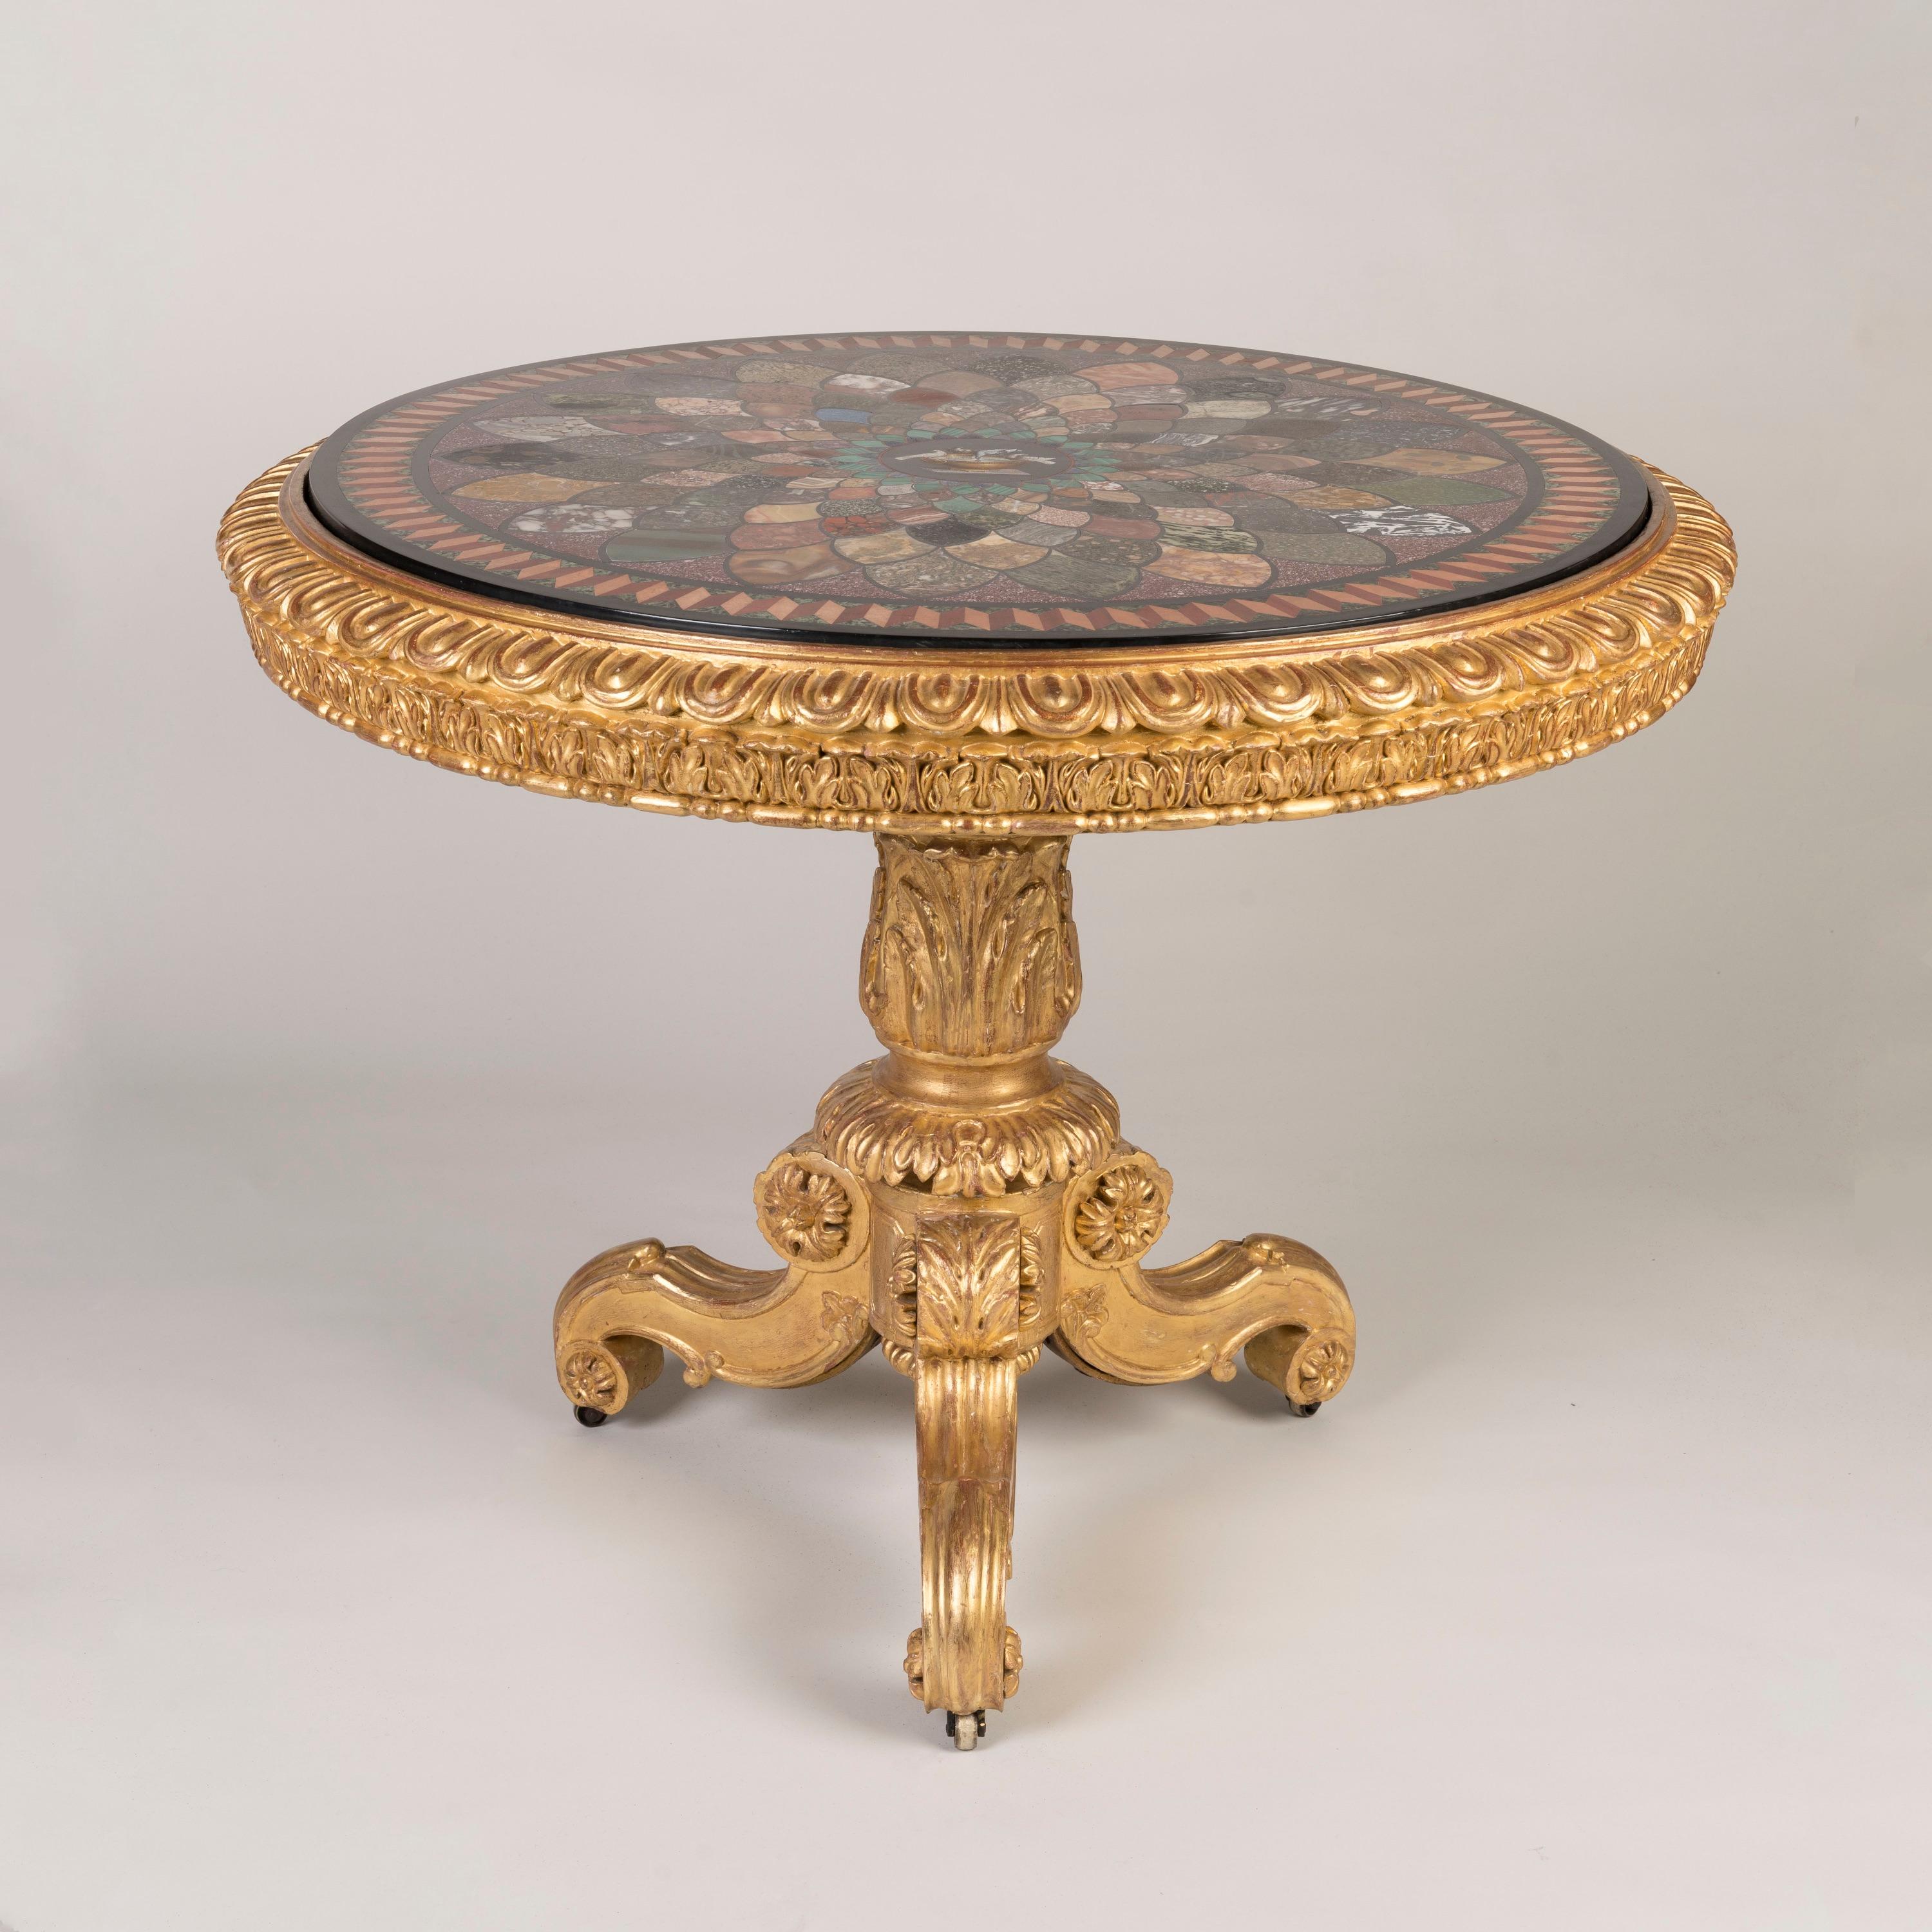 A superb Specimen marble centre table
The Top attributed to Alfonso Cavamelli of Rome

Inspired by the Roman mosaics discovered at the Palatine's Palace of the Ceasars, the circular top is made up from a host of rare marbles & semi-precious